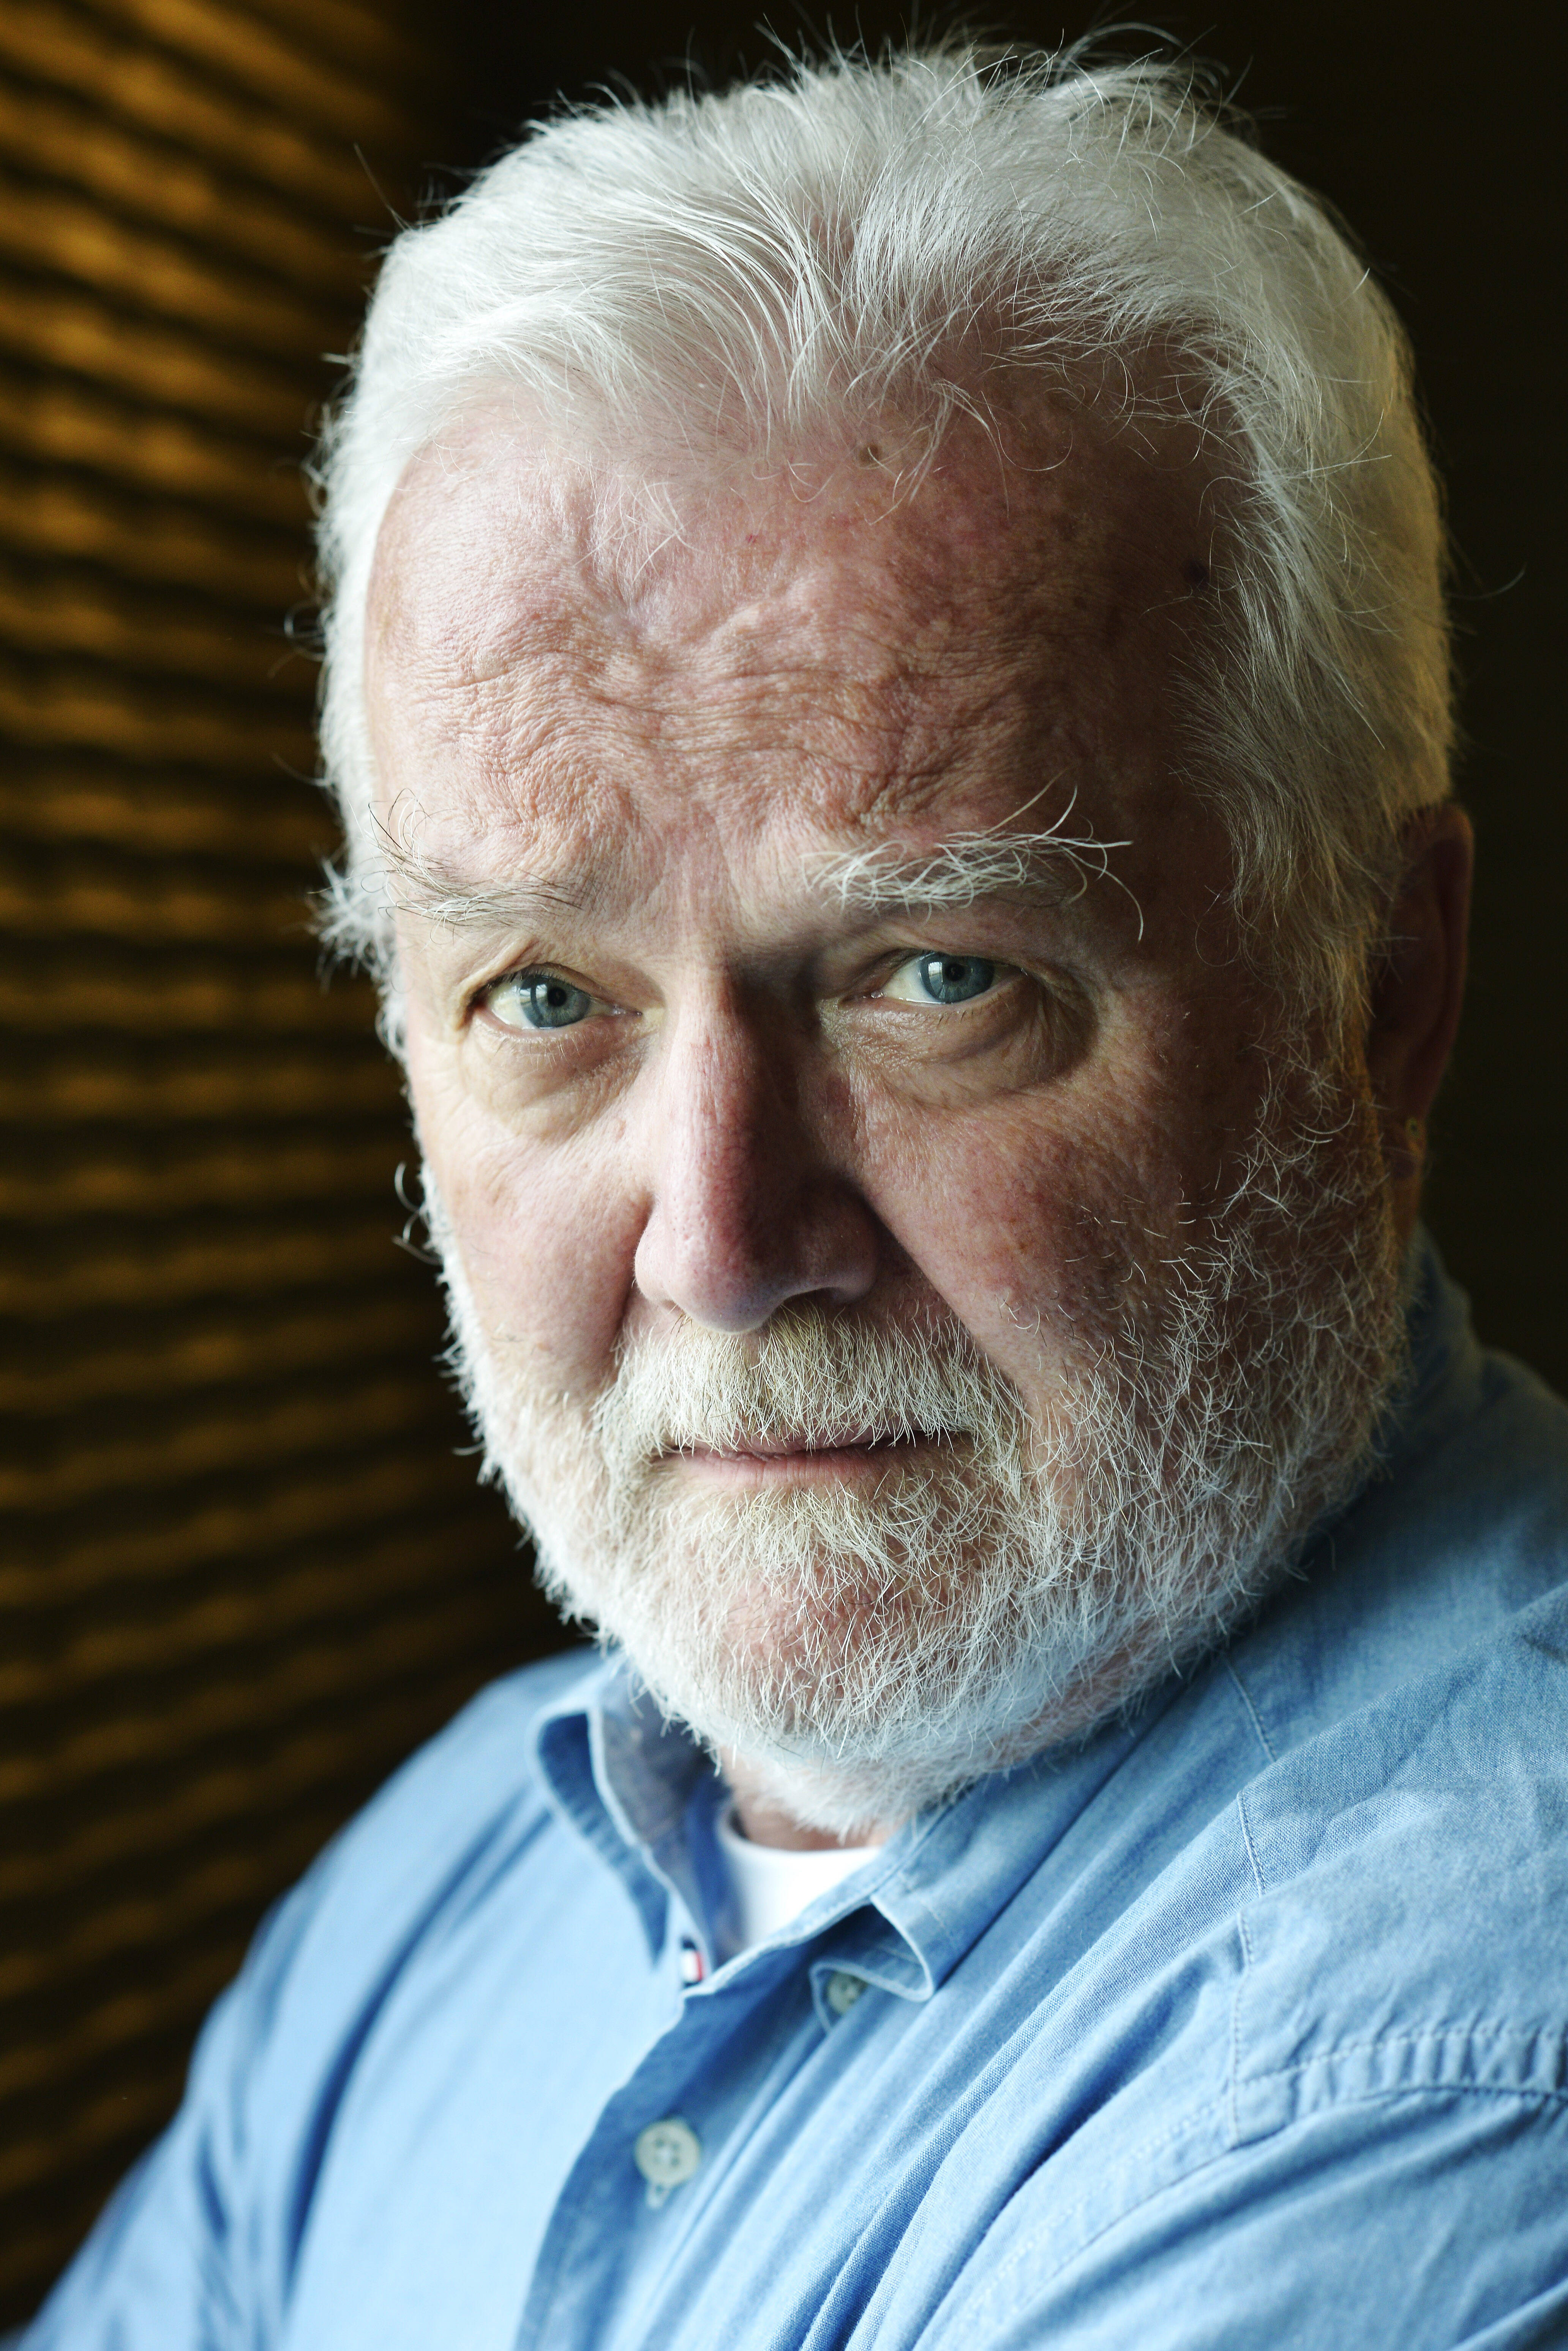 SAINT MALO, FRANCE - MAY 25: American writer Russell Banks poses during a portrait session held on May 25, 2015 in Saint Malo, France. (Photo by Ulf Andersen/Getty Images)